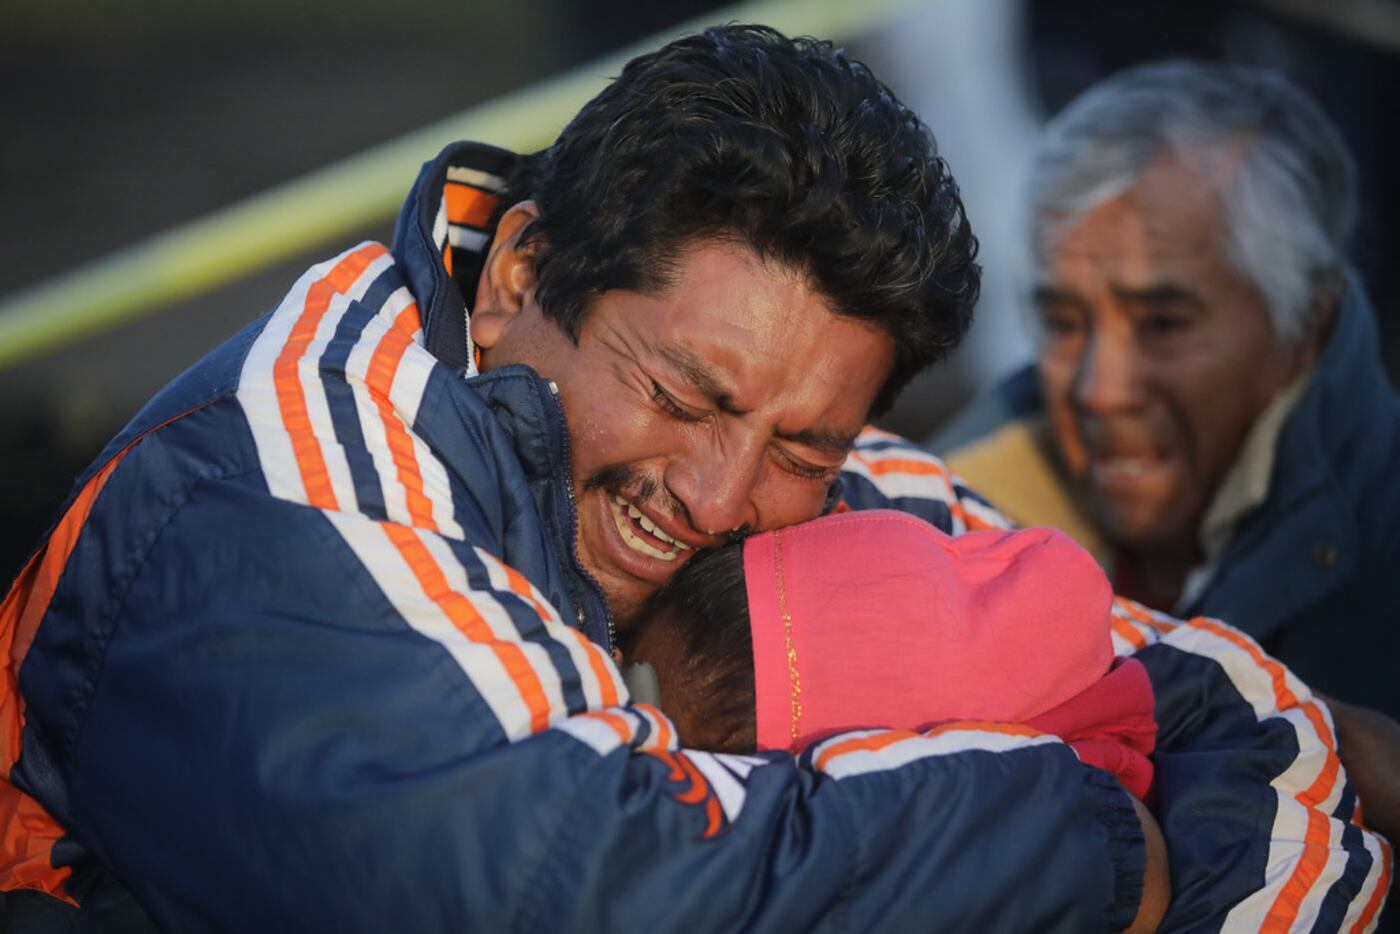 Family members of a victim cry when recognizing the body after an explosion in a pipeline...